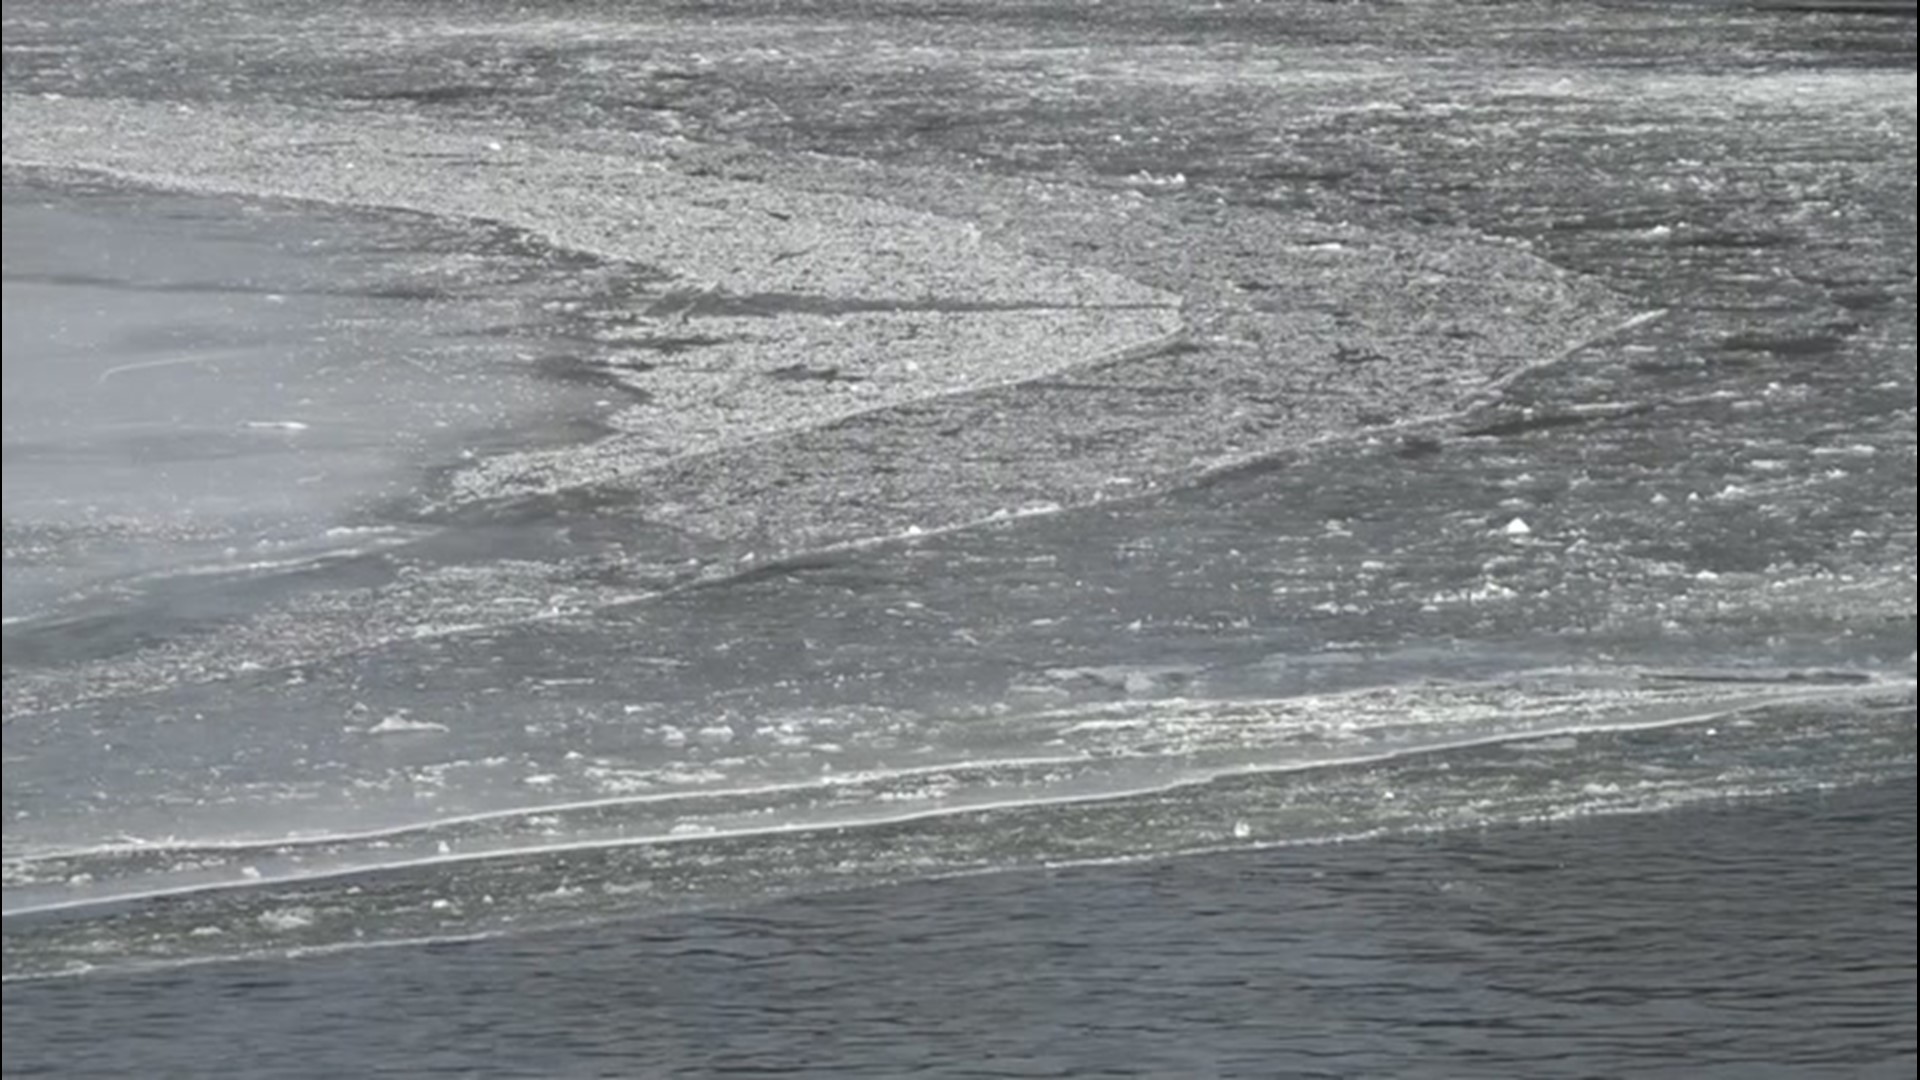 A rare ice disk gave Westbrook, Maine, a publicity boost in 2019, and then another formed in 2020. On Jan. 23, Jonathan Petramala was in town to see the disk.